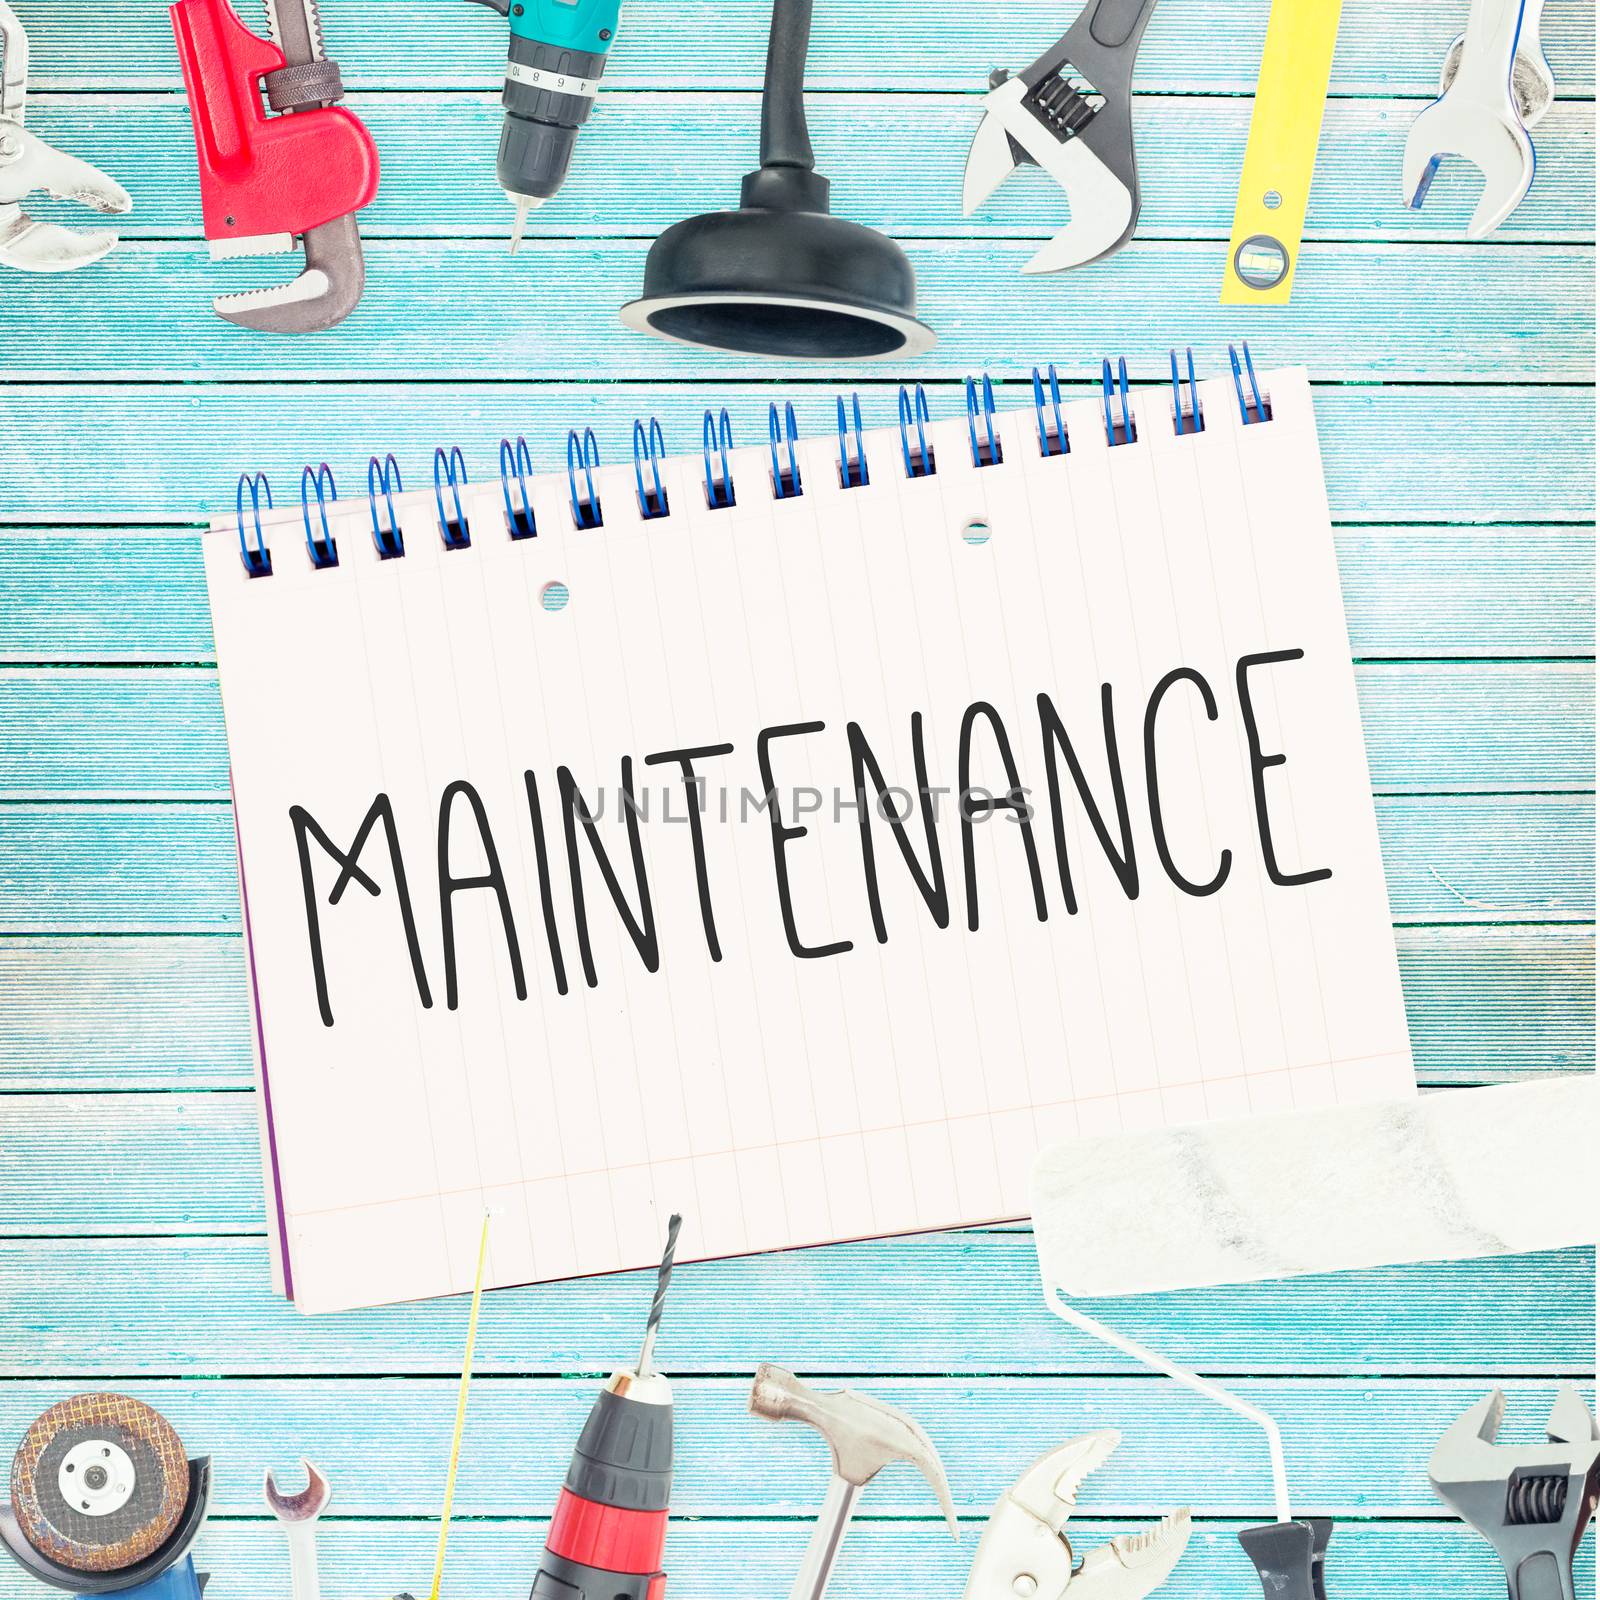 The word maintenance  against tools and notepad on wooden background